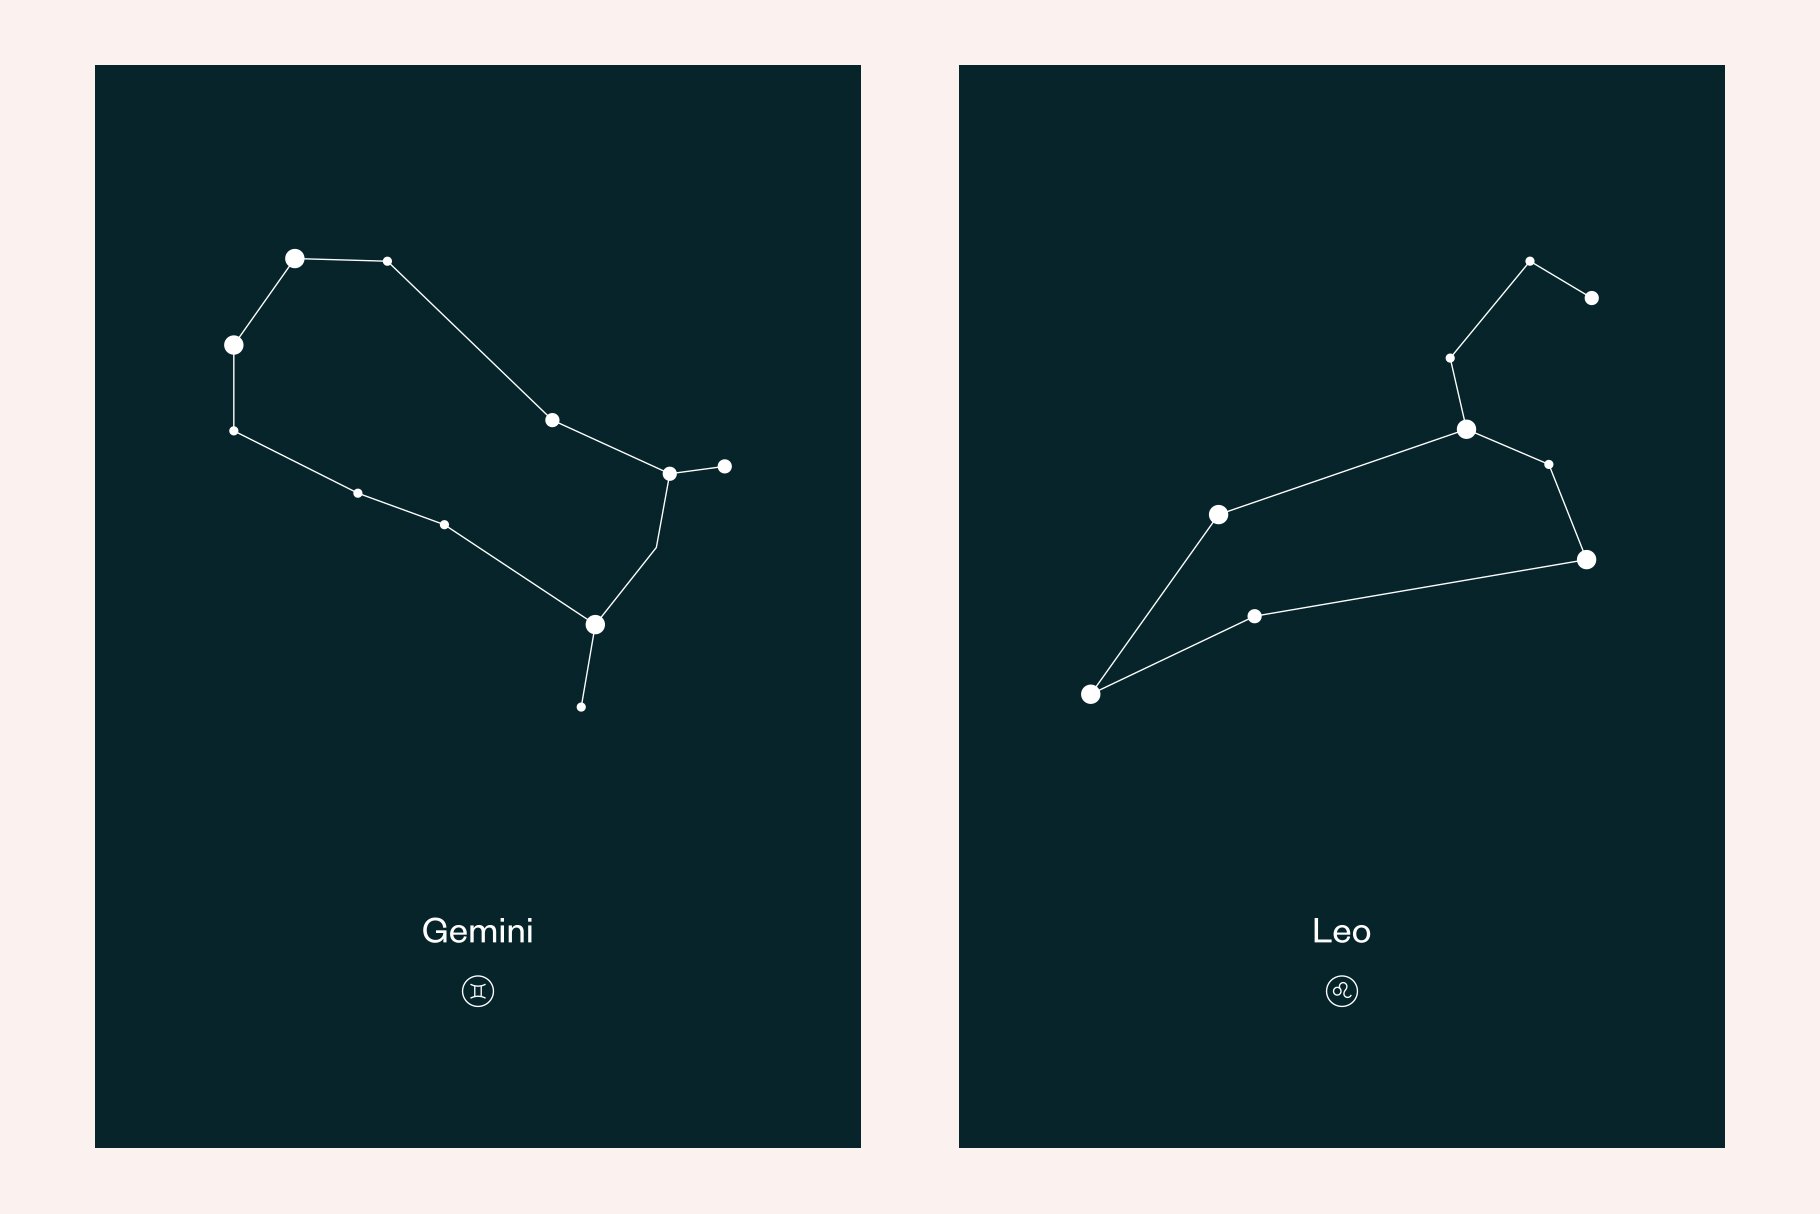 Cool and minimalistic gemini and leo graphic on the night sky.